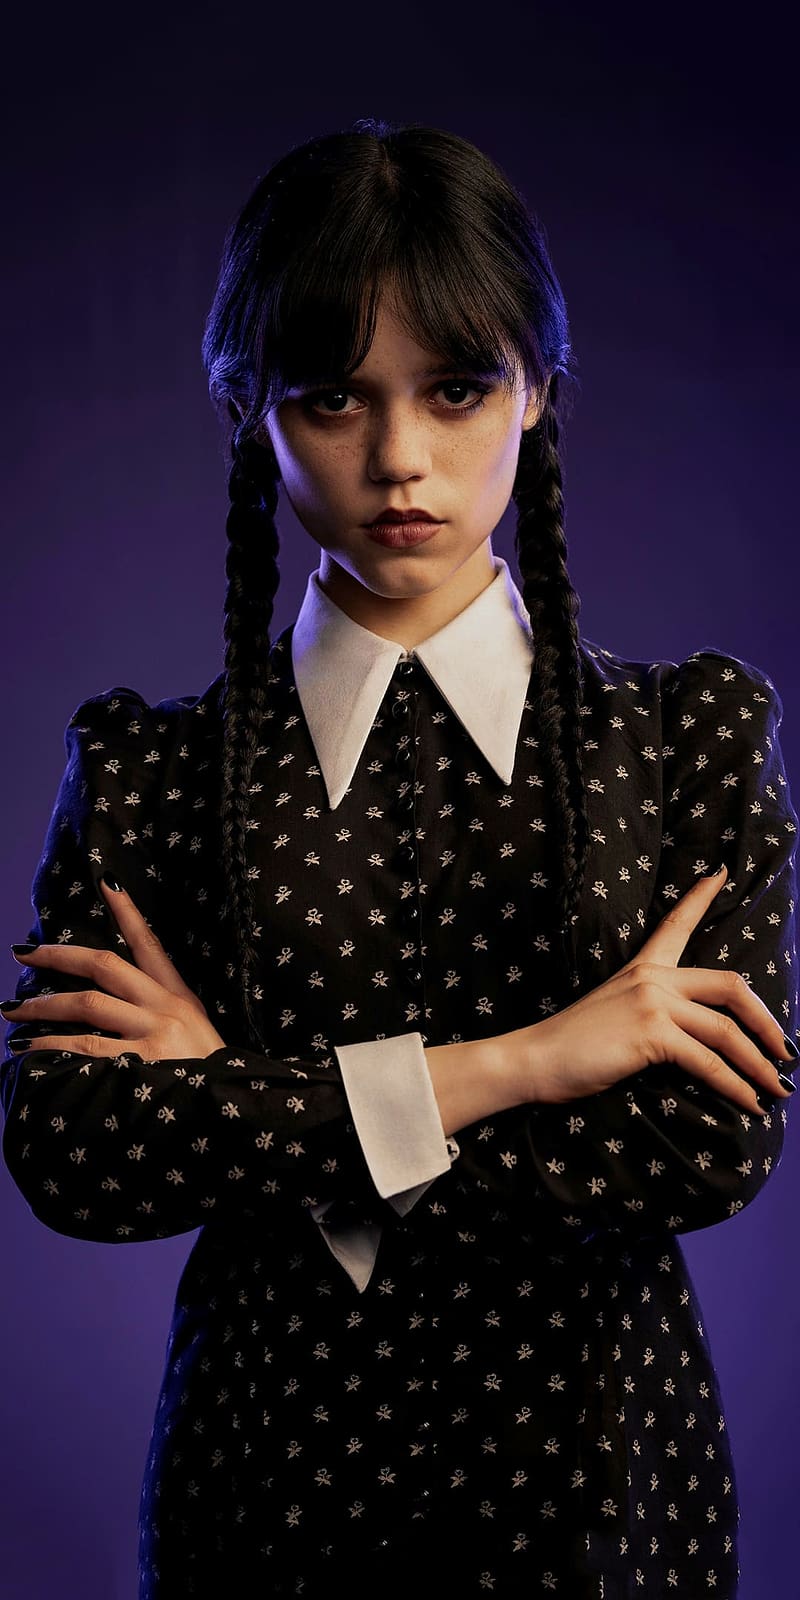 1920x1080px, 1080P free download | Wednesday Addams, HD phone wallpaper ...